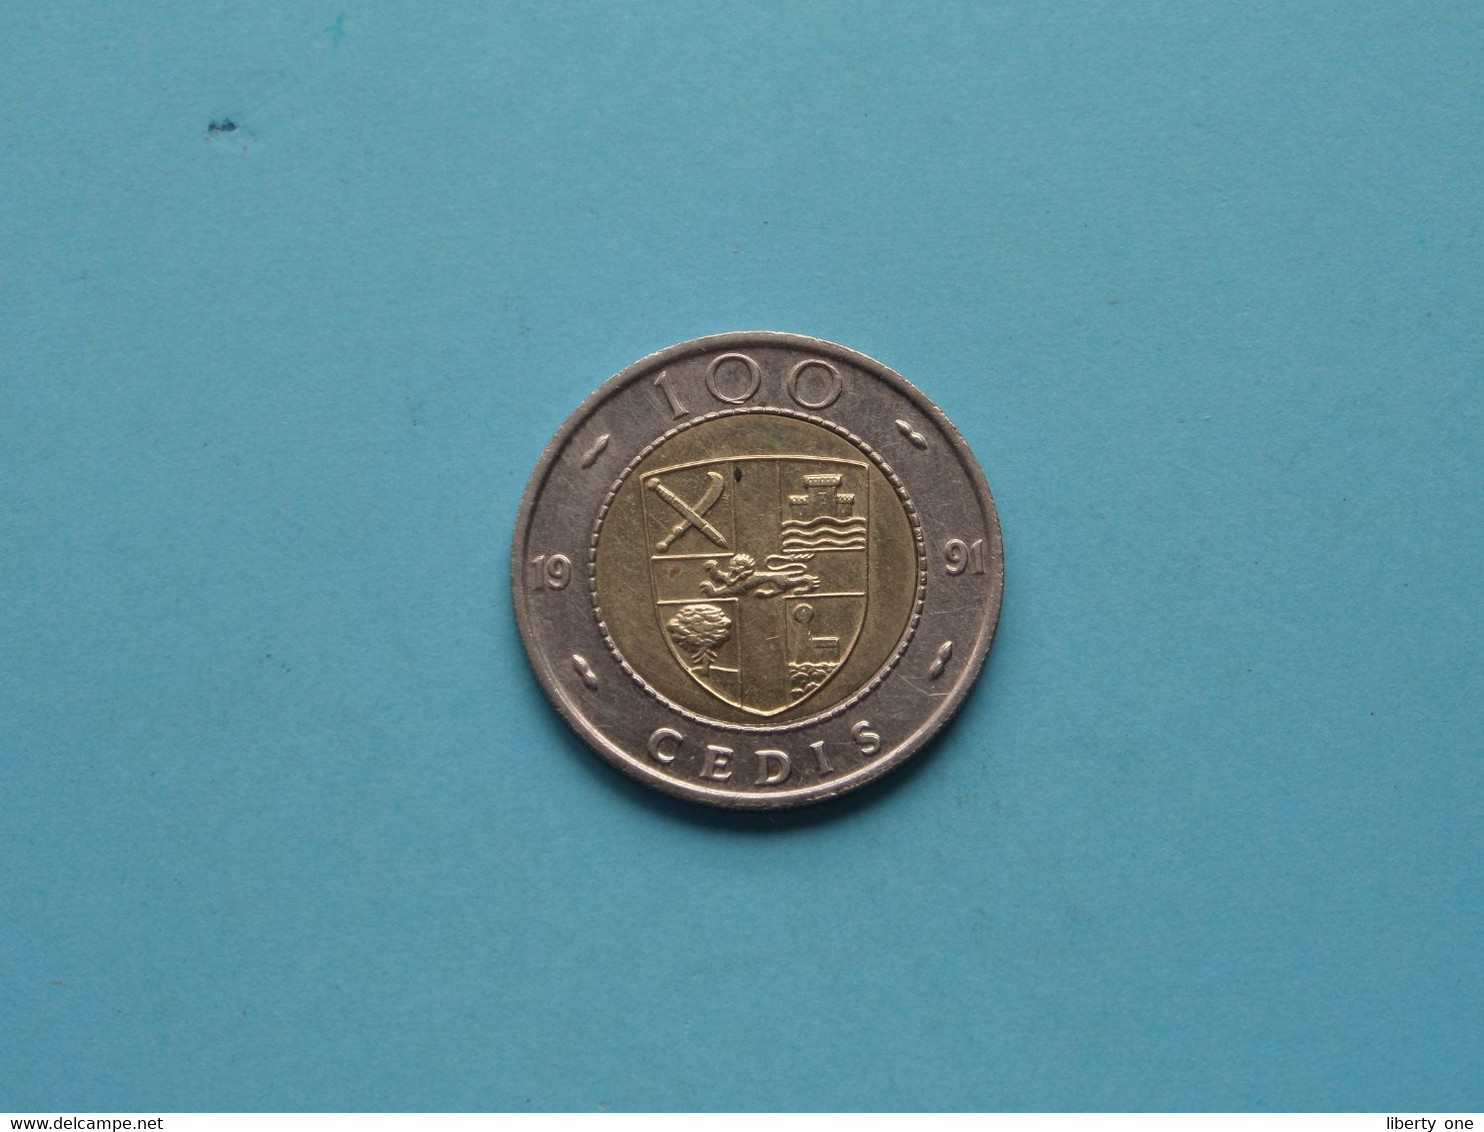 1991 - 100 Cedis - KM 32 ( Uncleaned Coin - For Grade, Please See Photo ) ! - Ghana